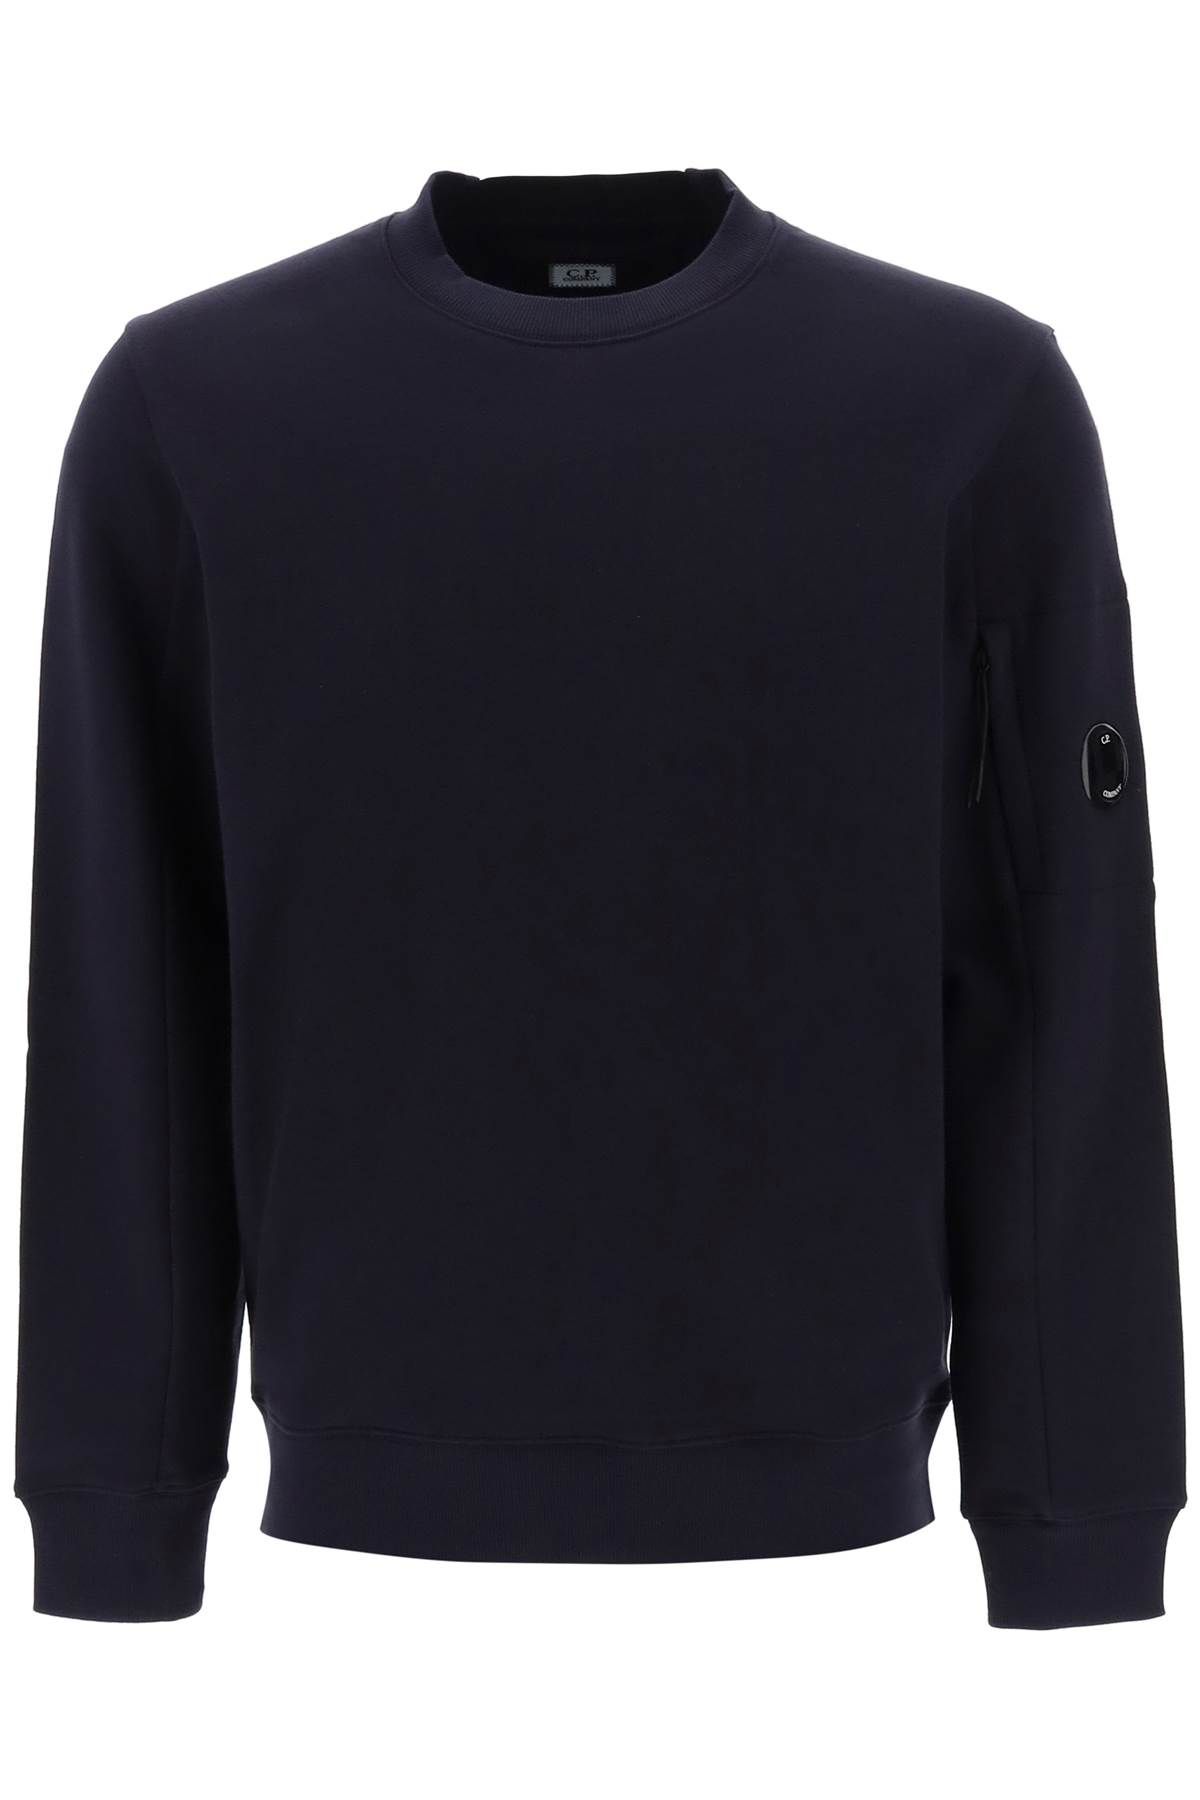 CP COMPANY CP COMPANY crew-neck sweatshirt in french terry